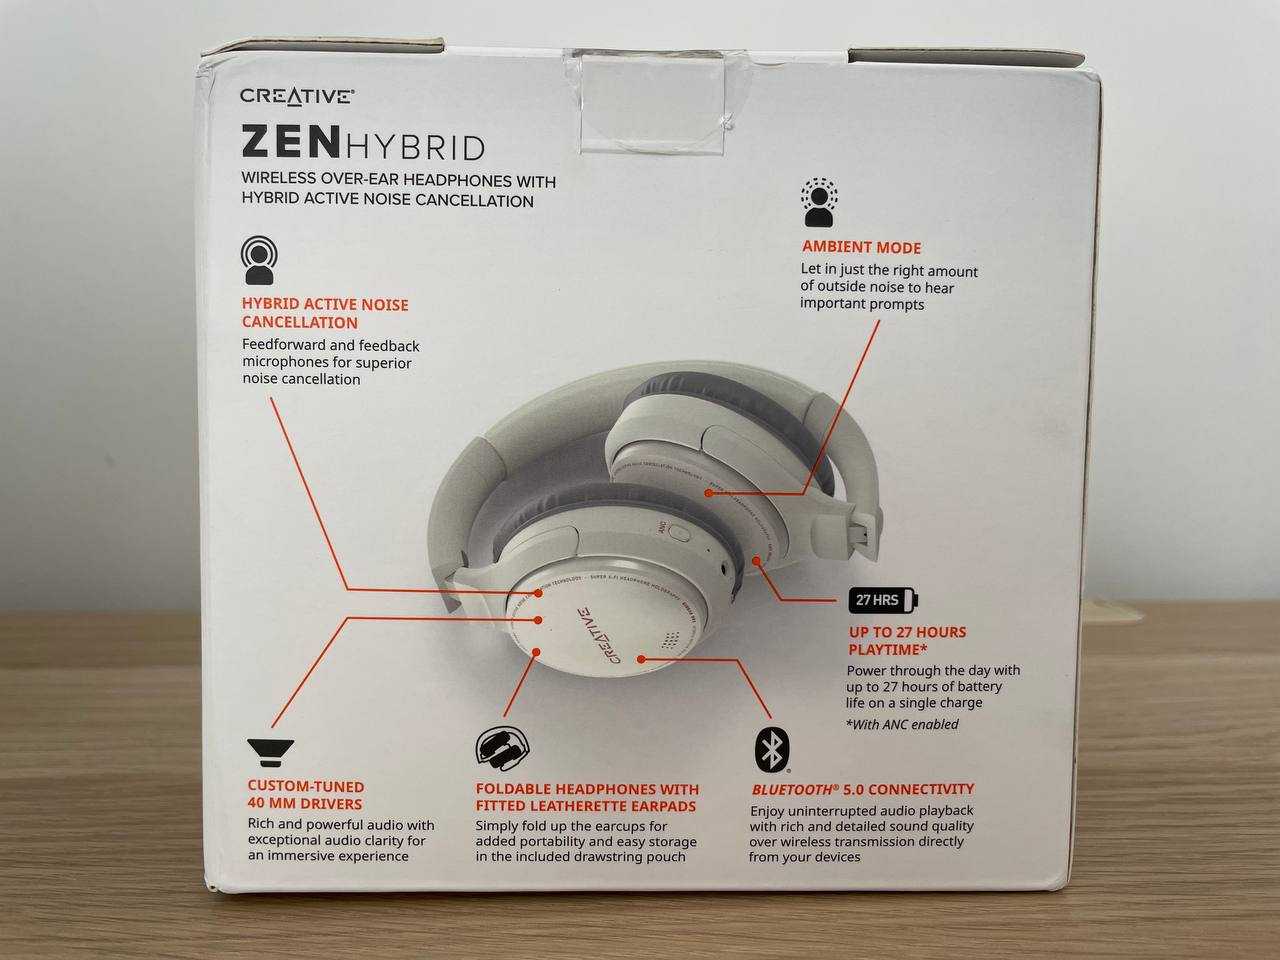 Creative Zen Hybrid review: quality at the right price